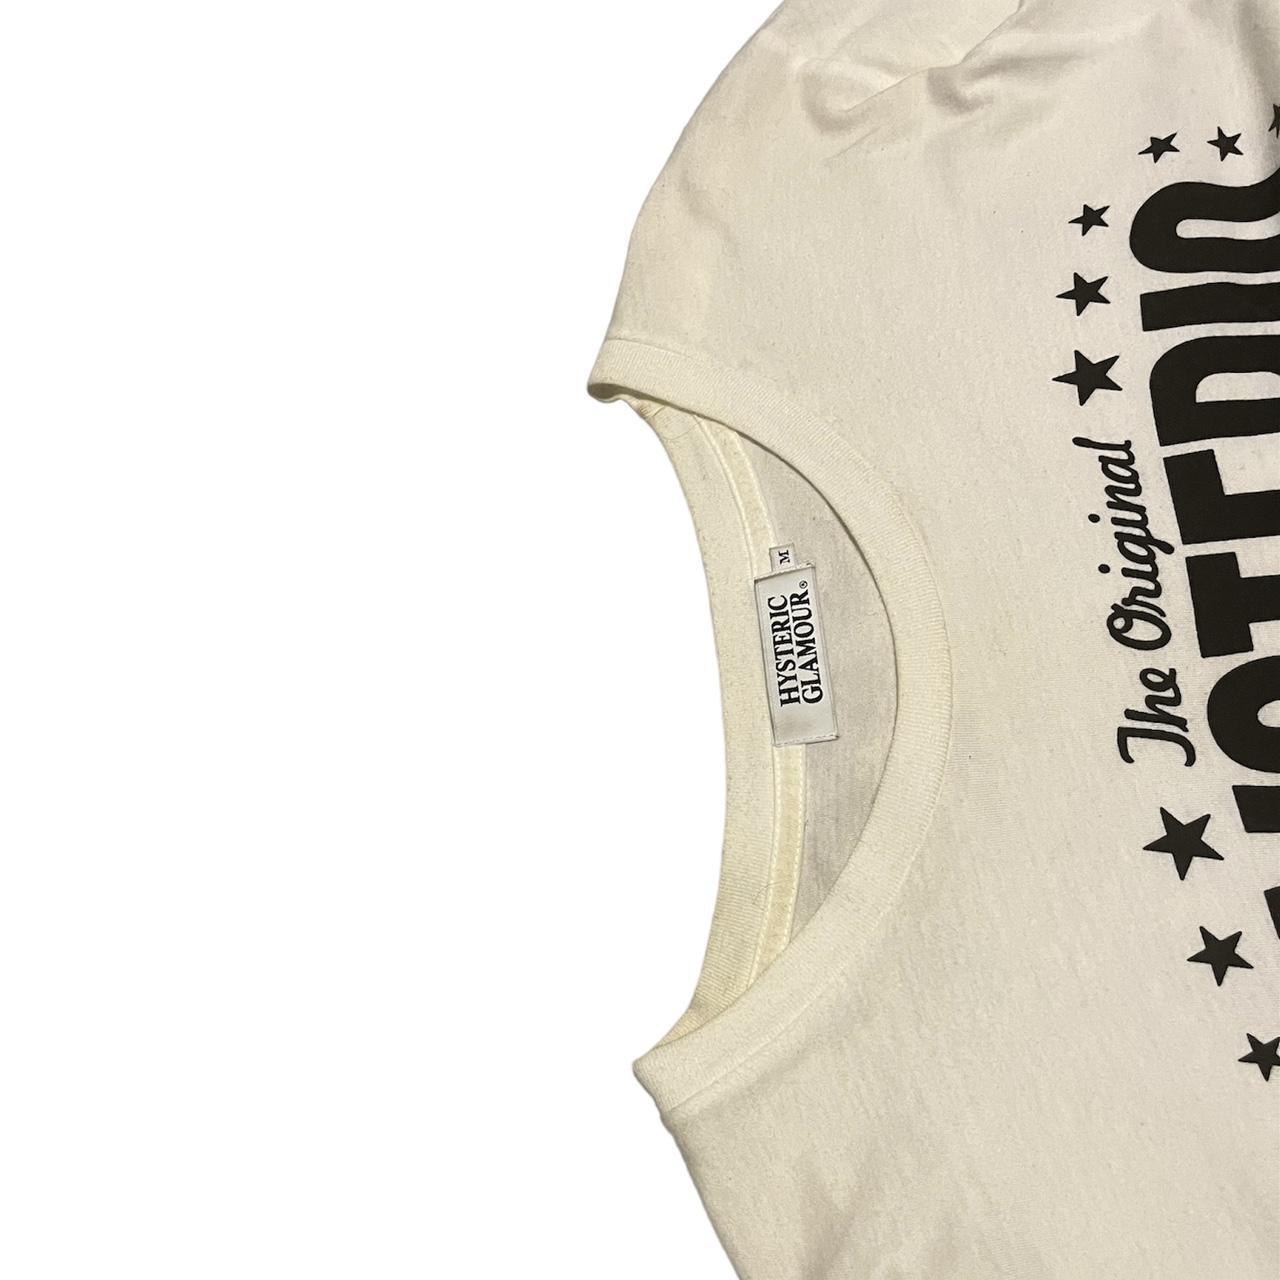 Hysteric Glamour Men's White T-shirt (4)